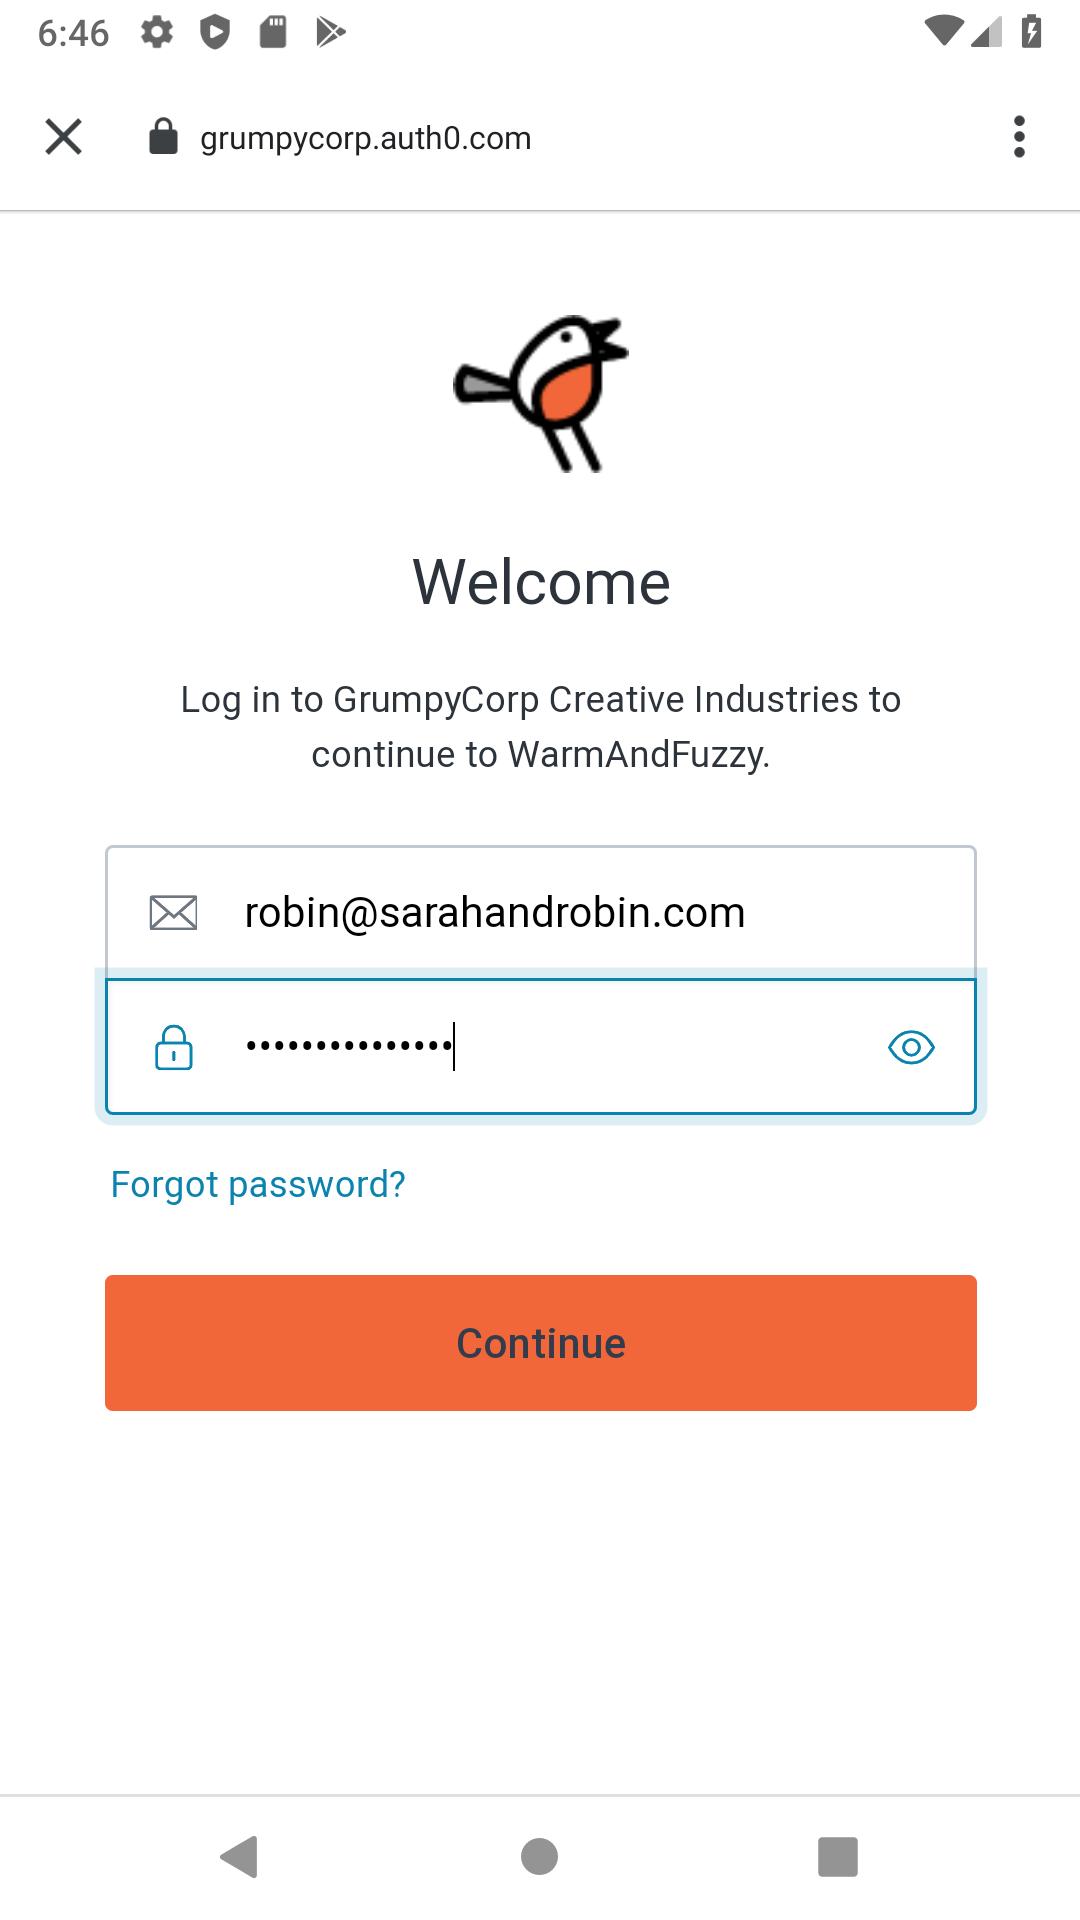 Logging in with Auth0